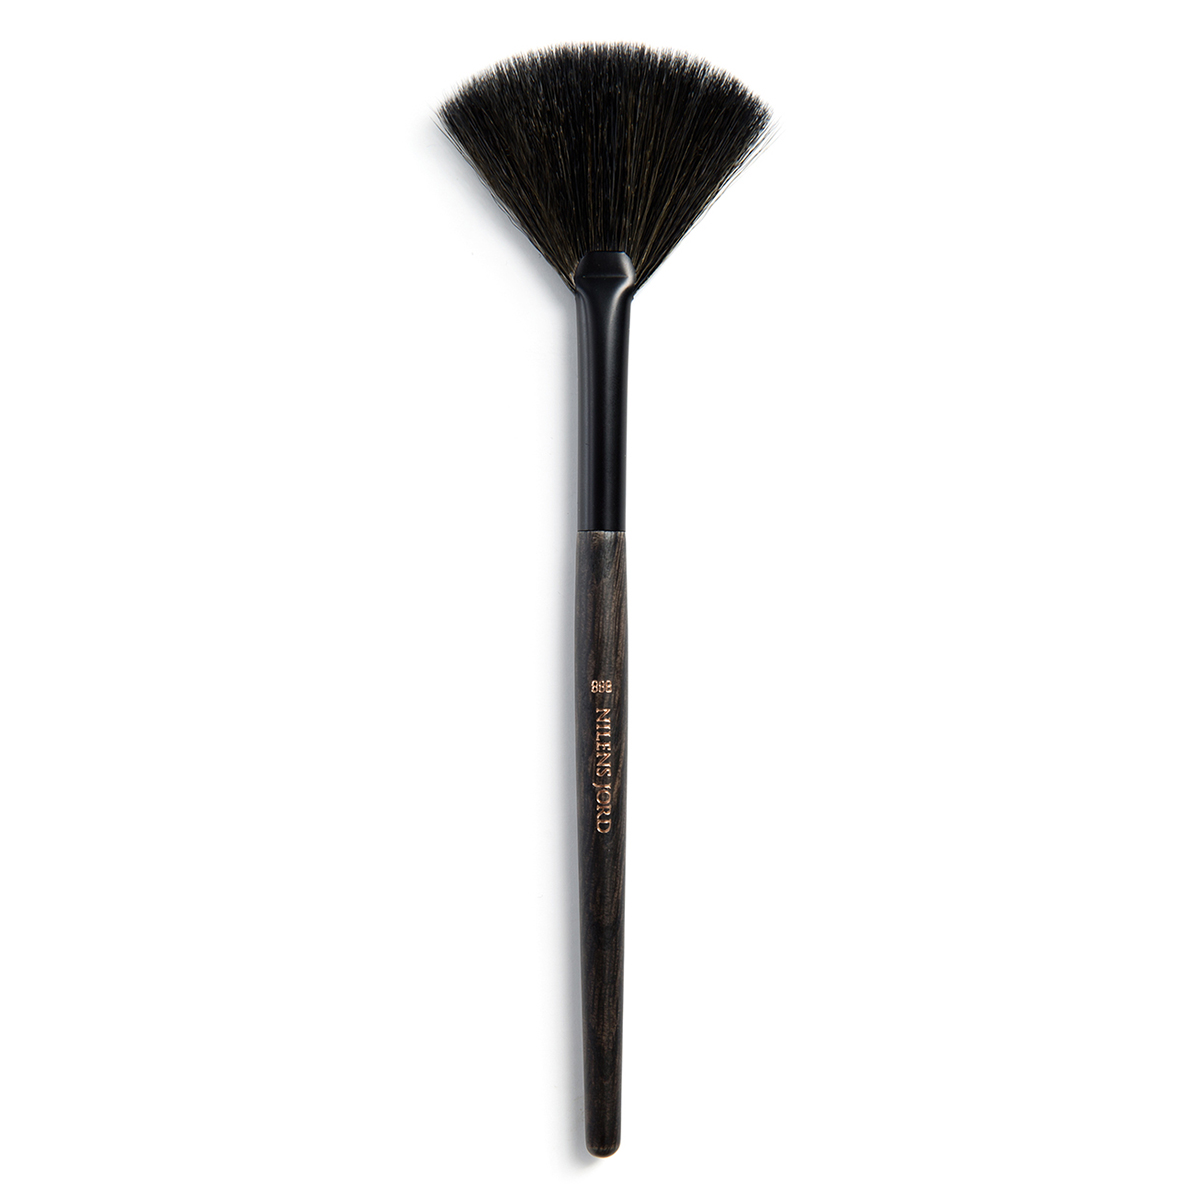 Nilens Jord - Pure Collection Fan Brush 888